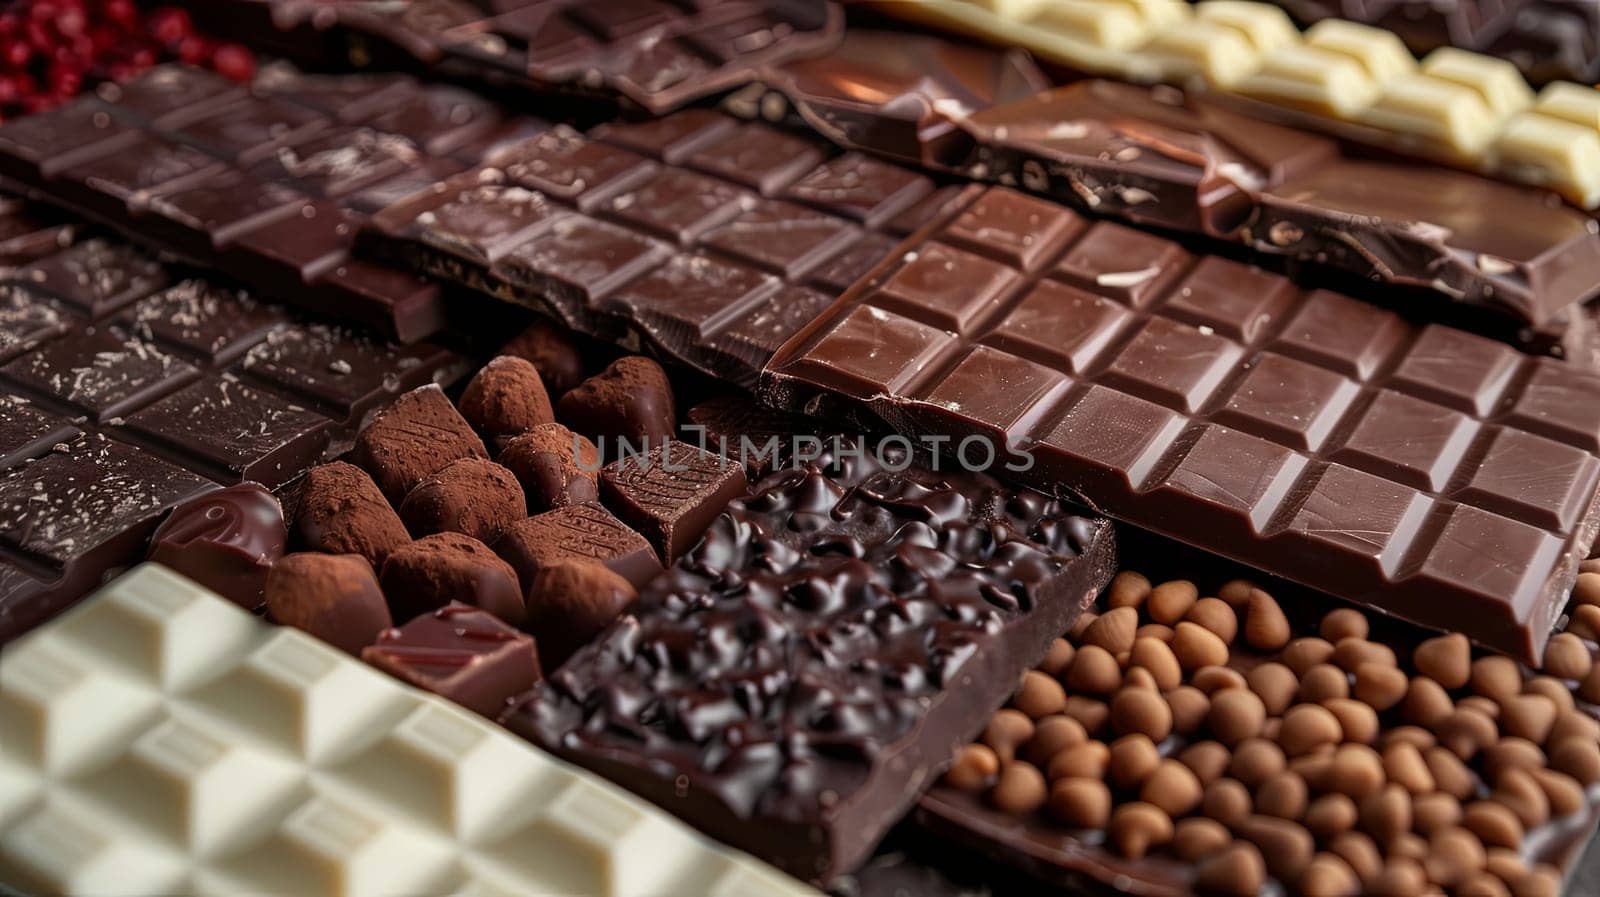 A close up view of a variety of chocolate bars in different flavors and types, showcasing rich colors and high detail.